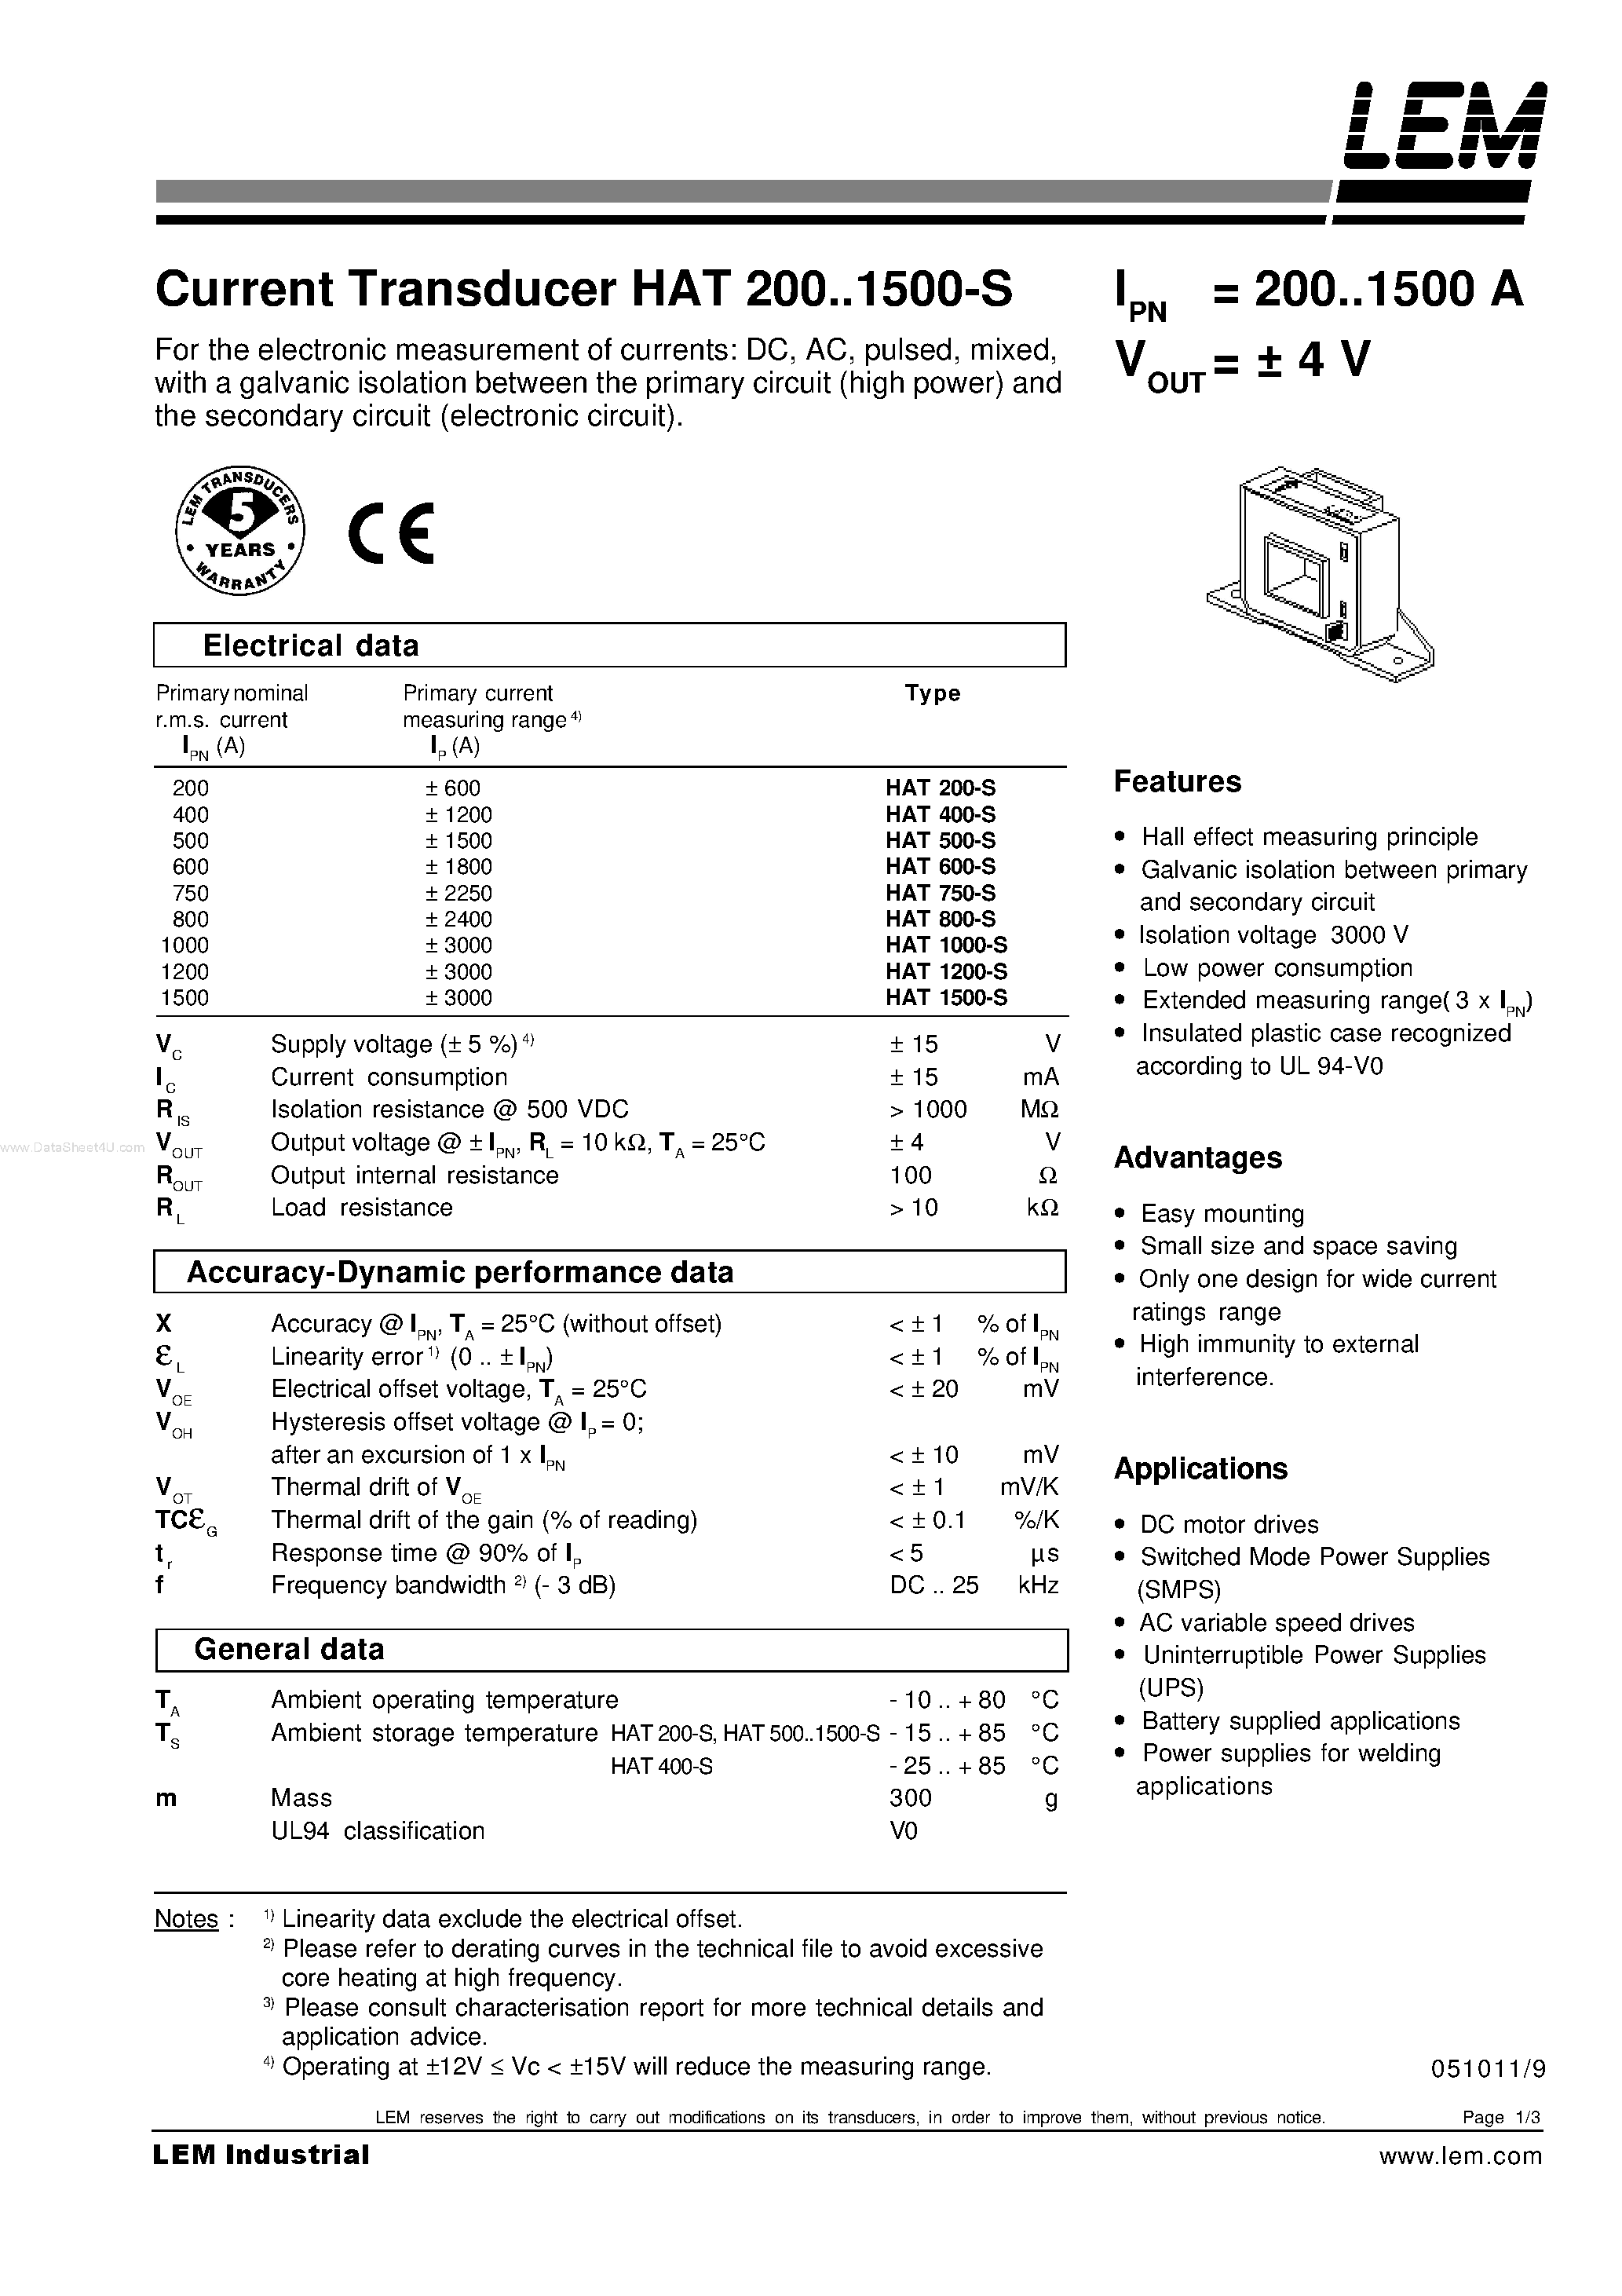 Datasheet HAT1000-S - (HAT200-S - HAT1500-S) Current Transducer page 1